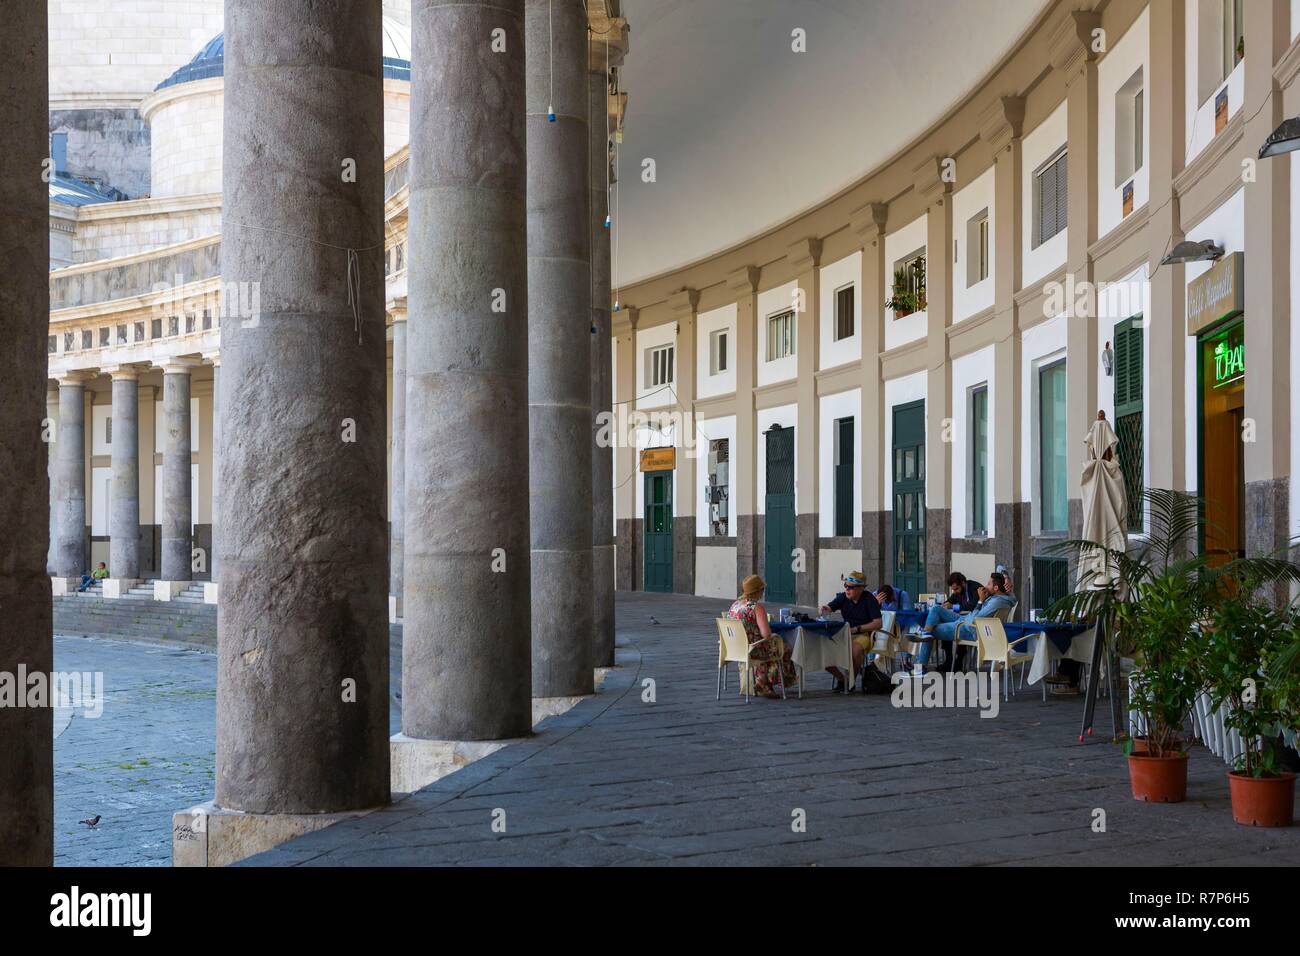 Italy, Campania, Naples, historical center listed as World Heritage by UNESCO, the church of San Francesco di Paola in Piazza del Plebiscito, 19th century square with its Doric hemicycle and Basilica di San Francesco di Paola dedicated in 1836 Stock Photo